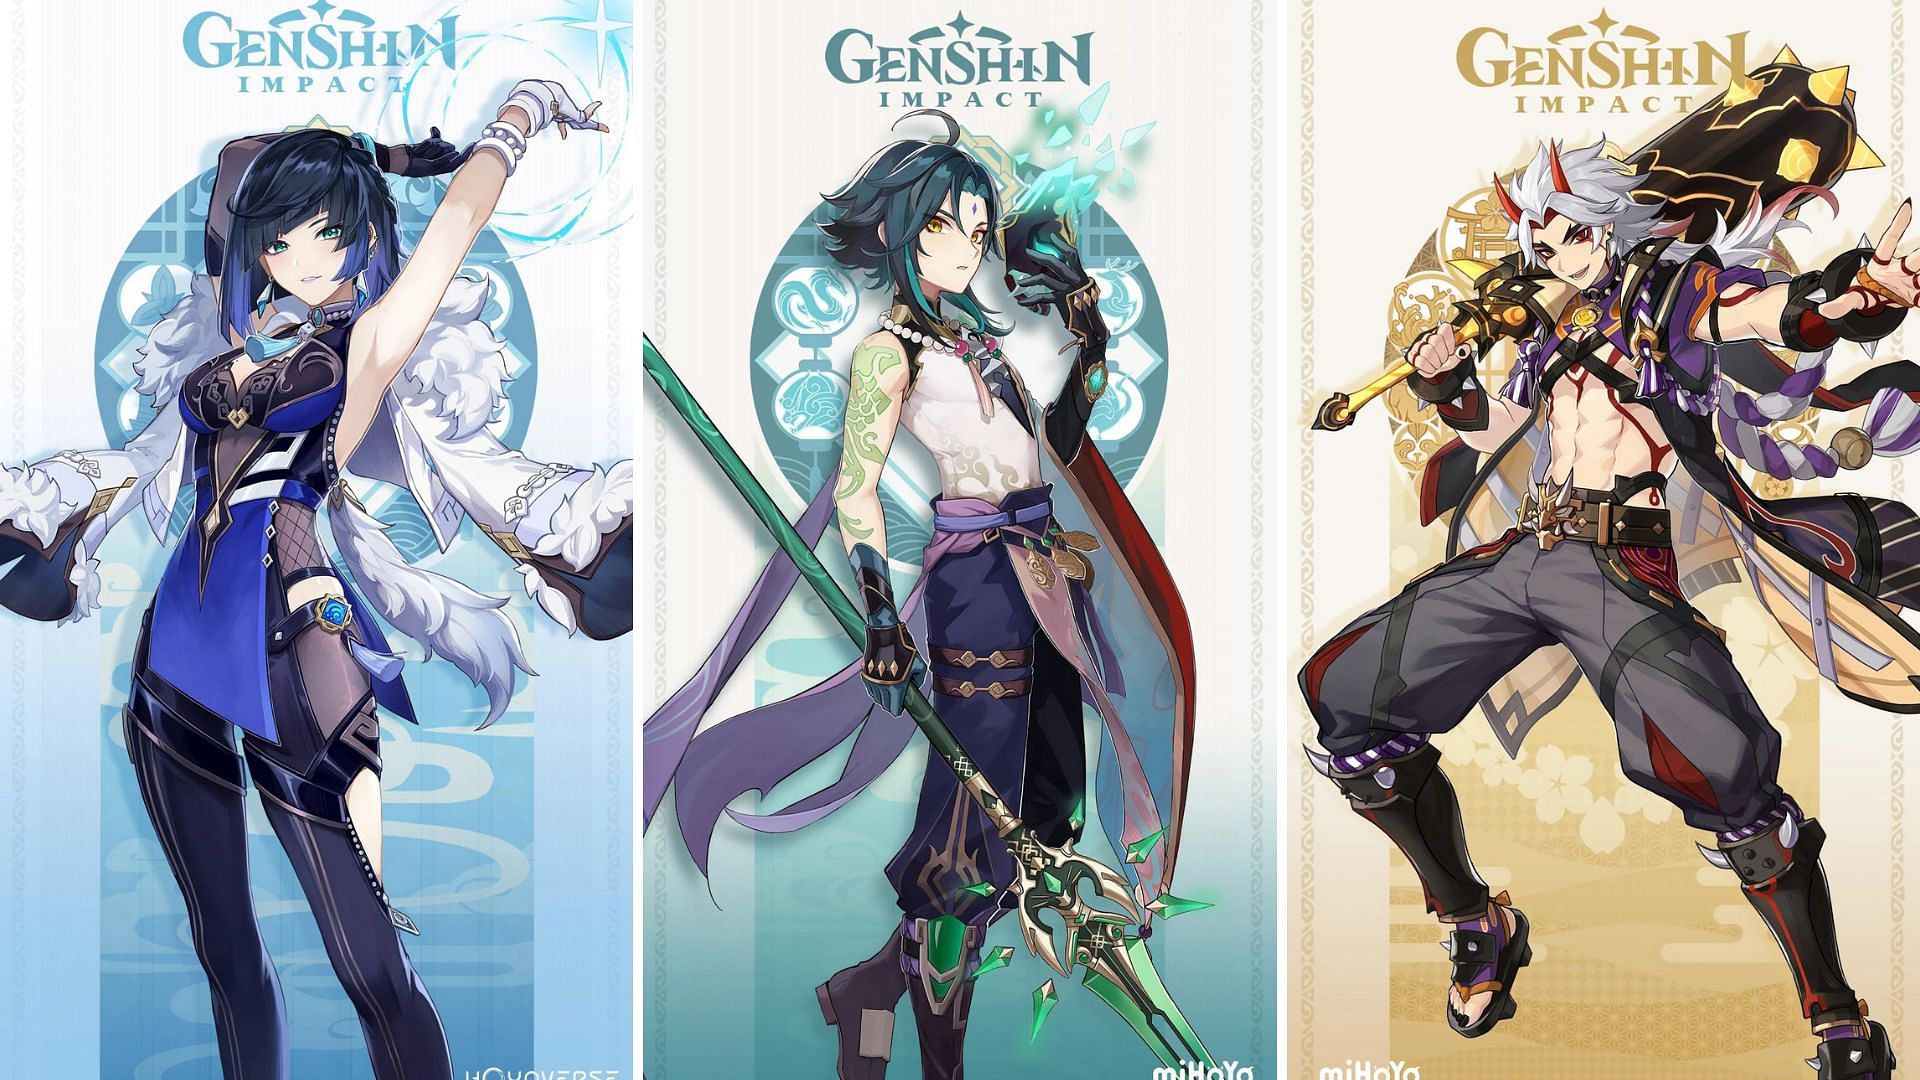 Genshin Impact 2.7 banners: Xiao, Yelan, Weapons and 4-stars leaked